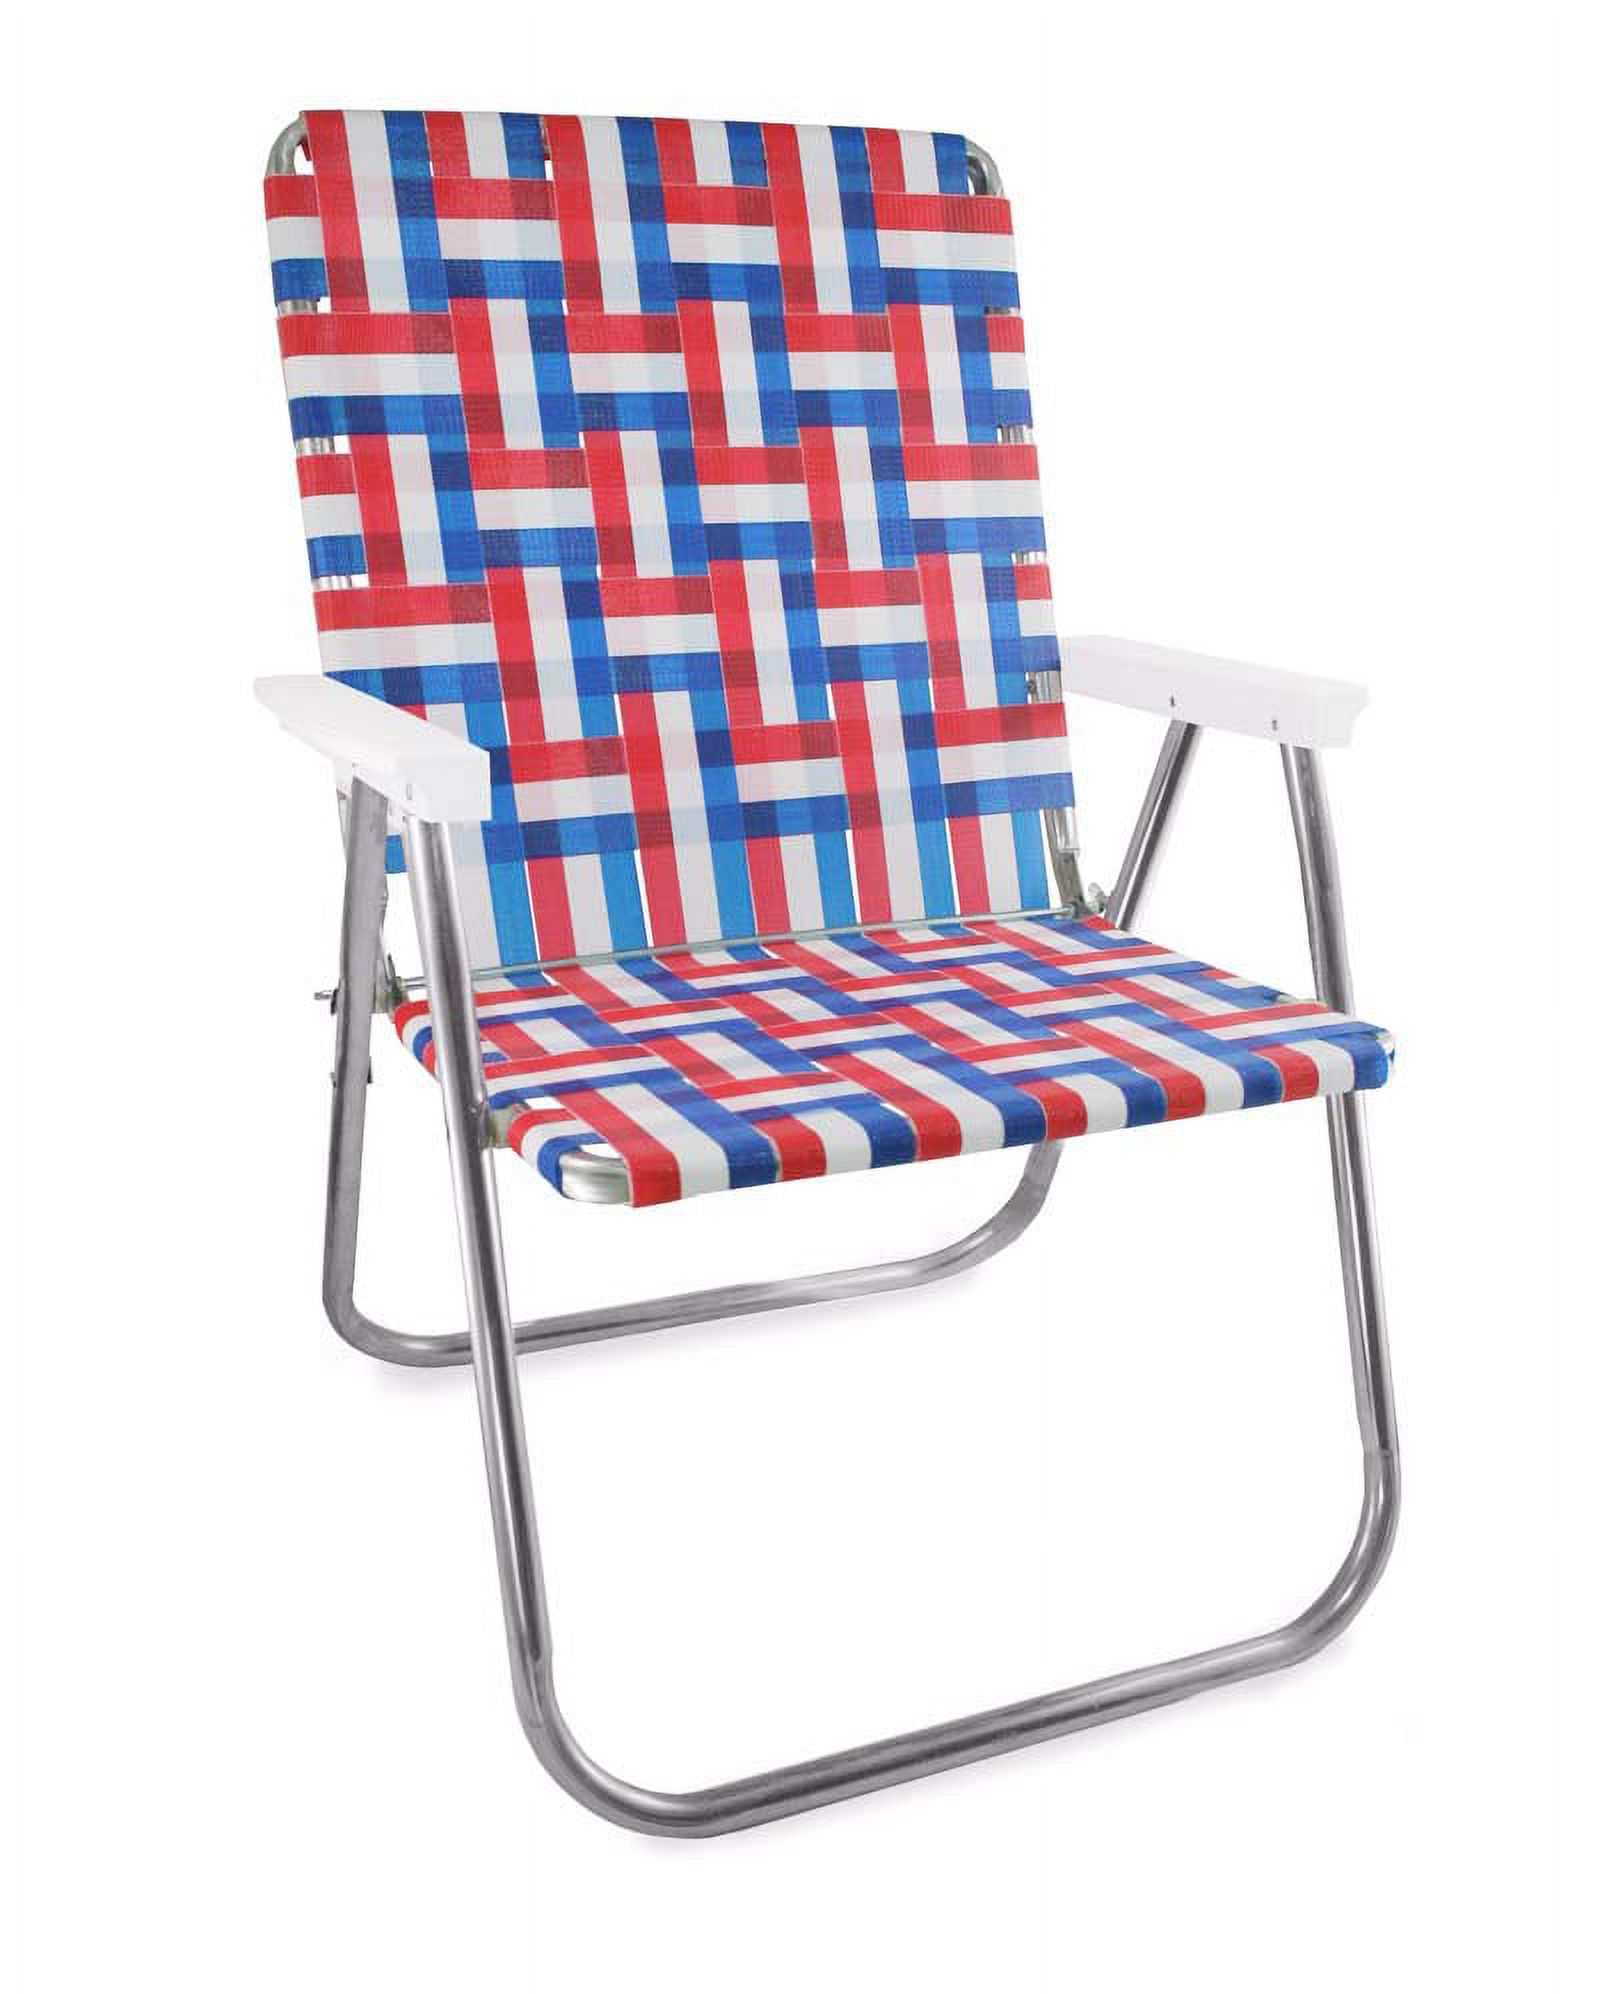 Lawn Chair USA Webbing Chair Magnum | Folding Aluminum Lawn Chair with UV-Resistant Webbing | For Camping | Sports and Beach | Old Glory with White Arms - image 1 of 7